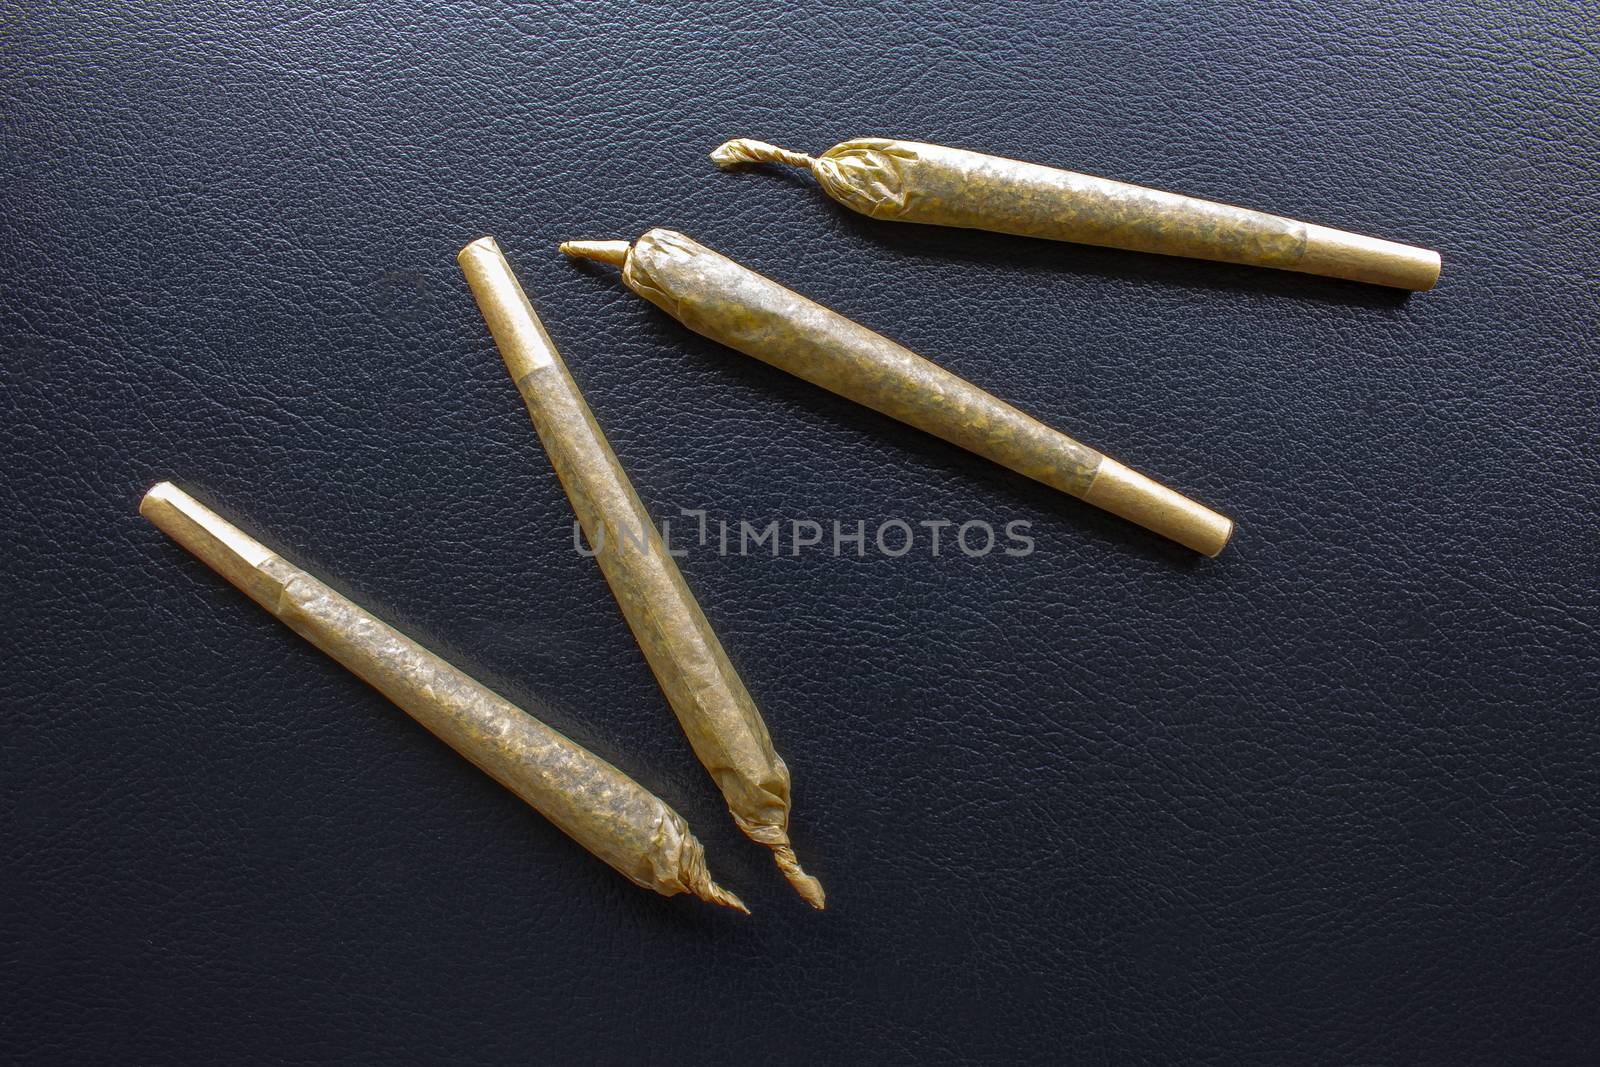 Cannabis Pre-Roll Joints Cigarettes on a leather black texture. by oasisamuel